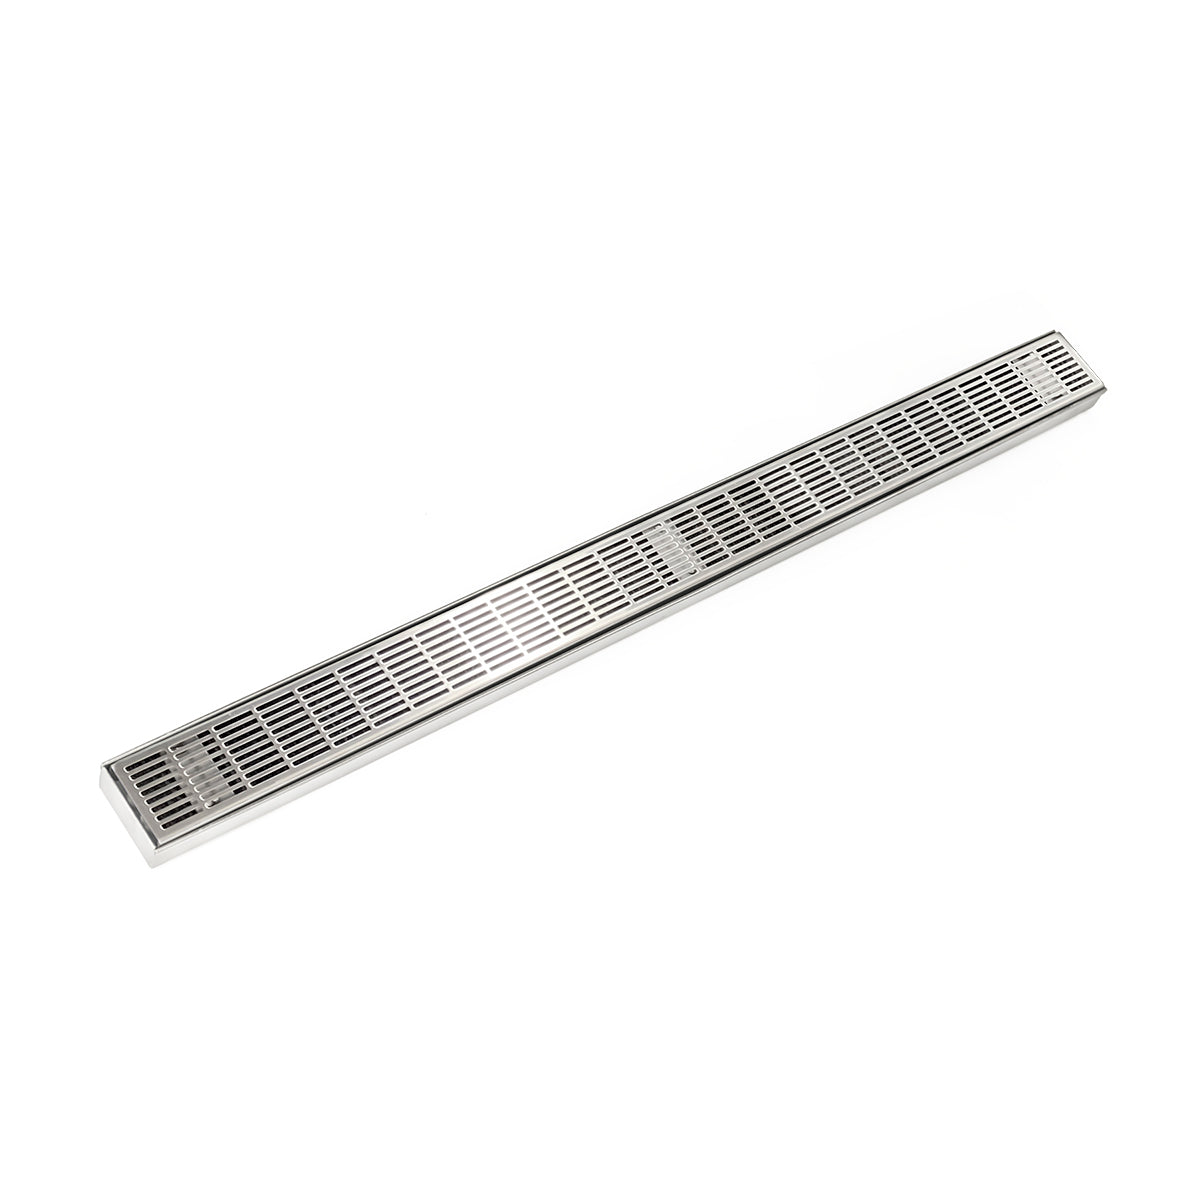 Infinity Drain 36" FX Series Fixed Length Linear Drain Kit with Perforated Slotted Grate